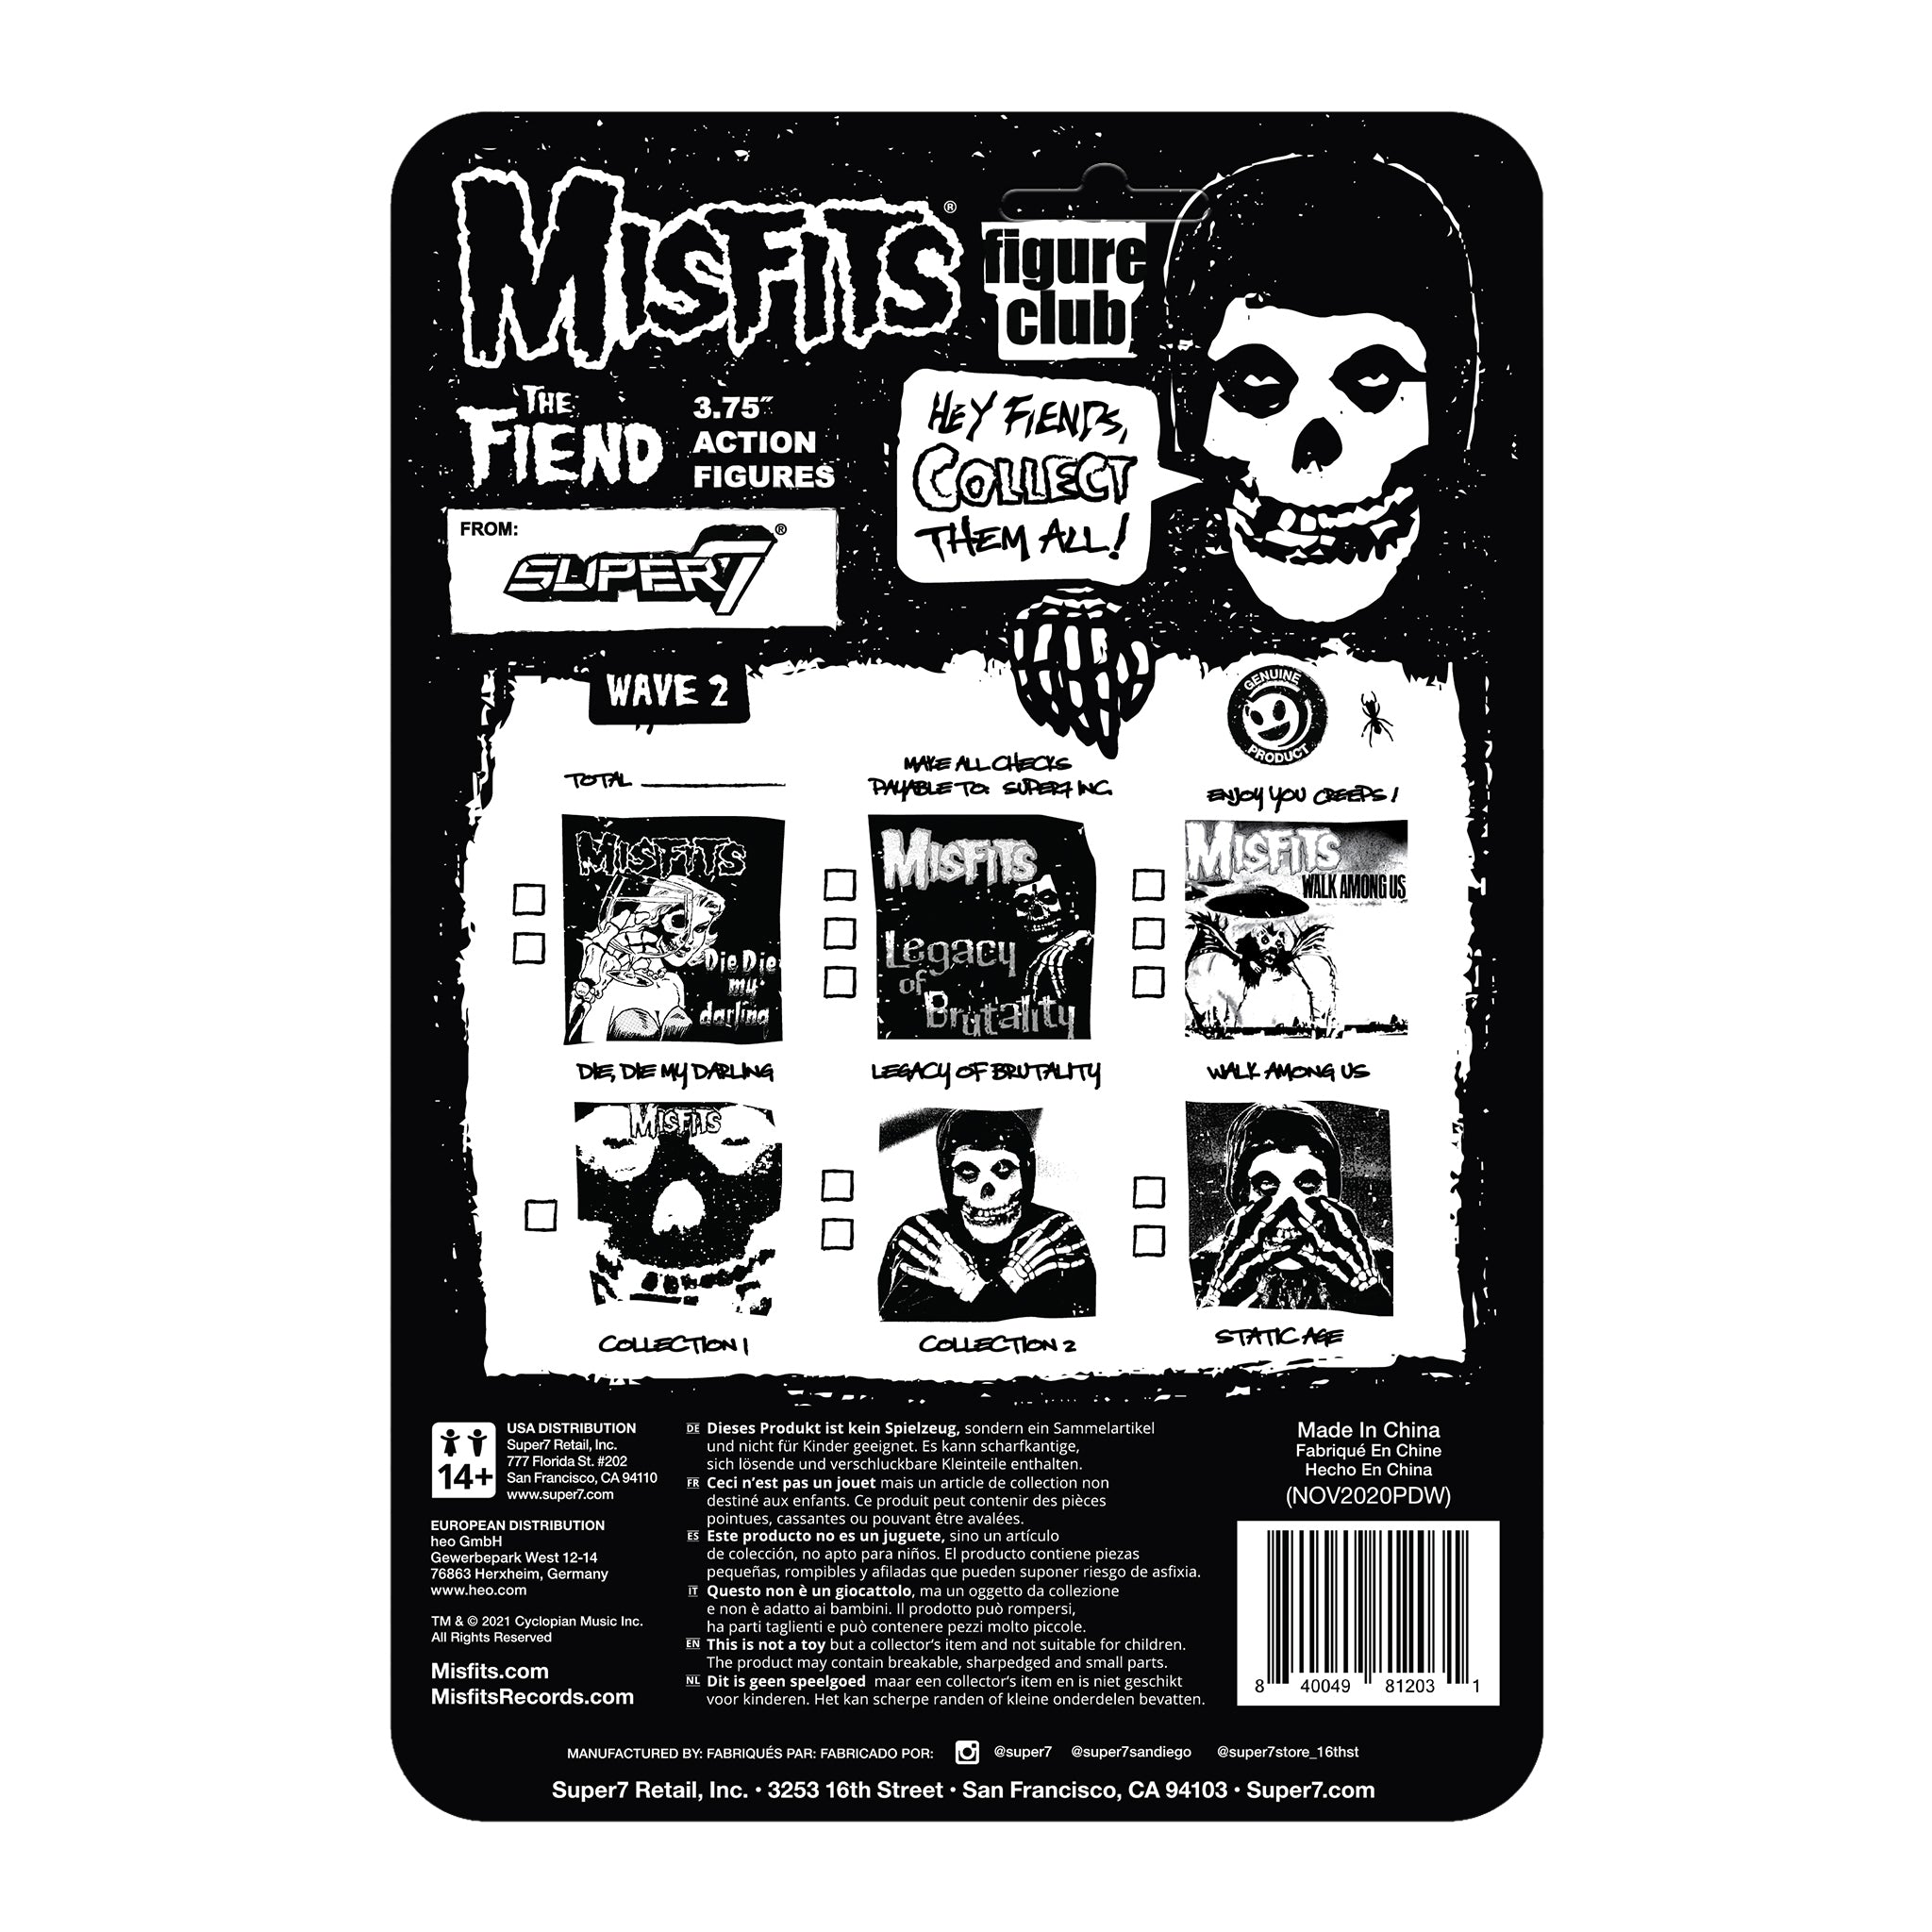 Misfits ReAction - Fiend Legacy of Brutality (White)